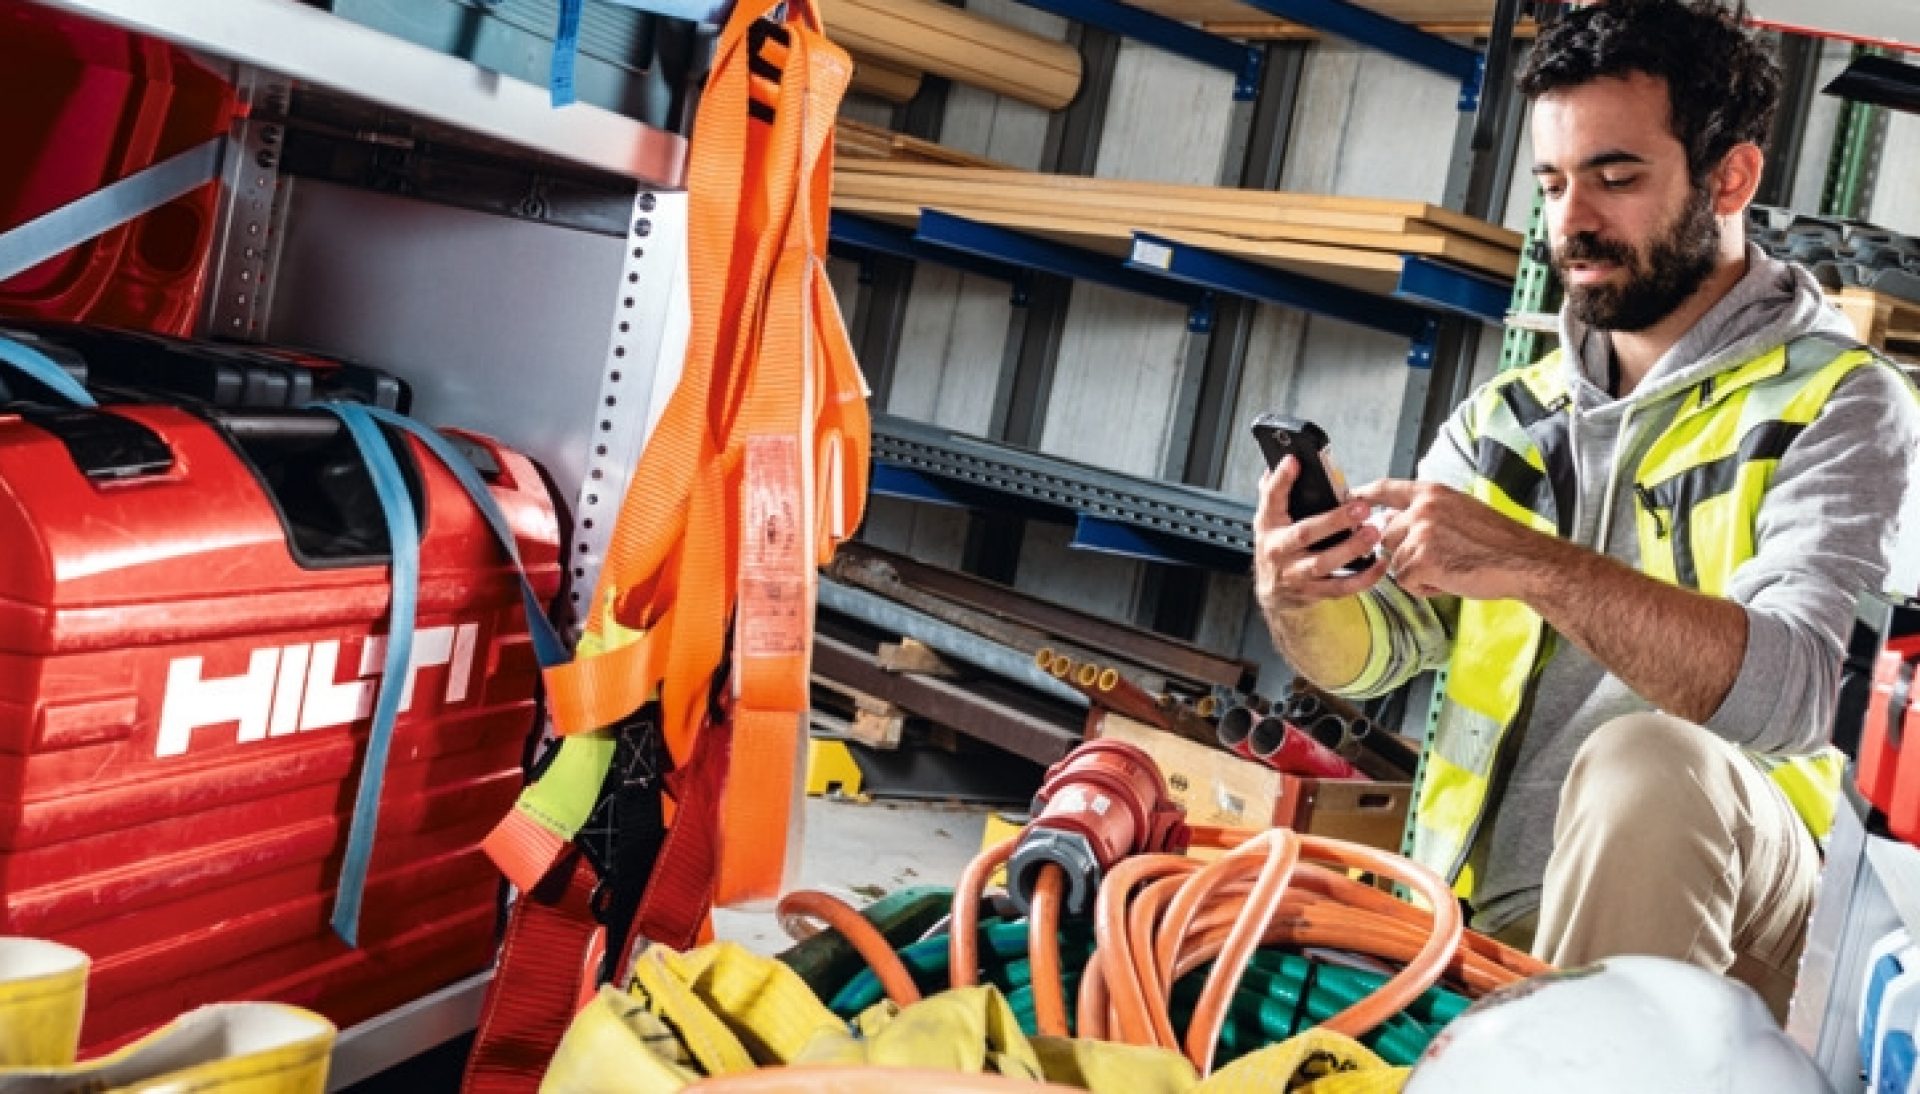 ON!Track asset management solution enables safety at your fingertips